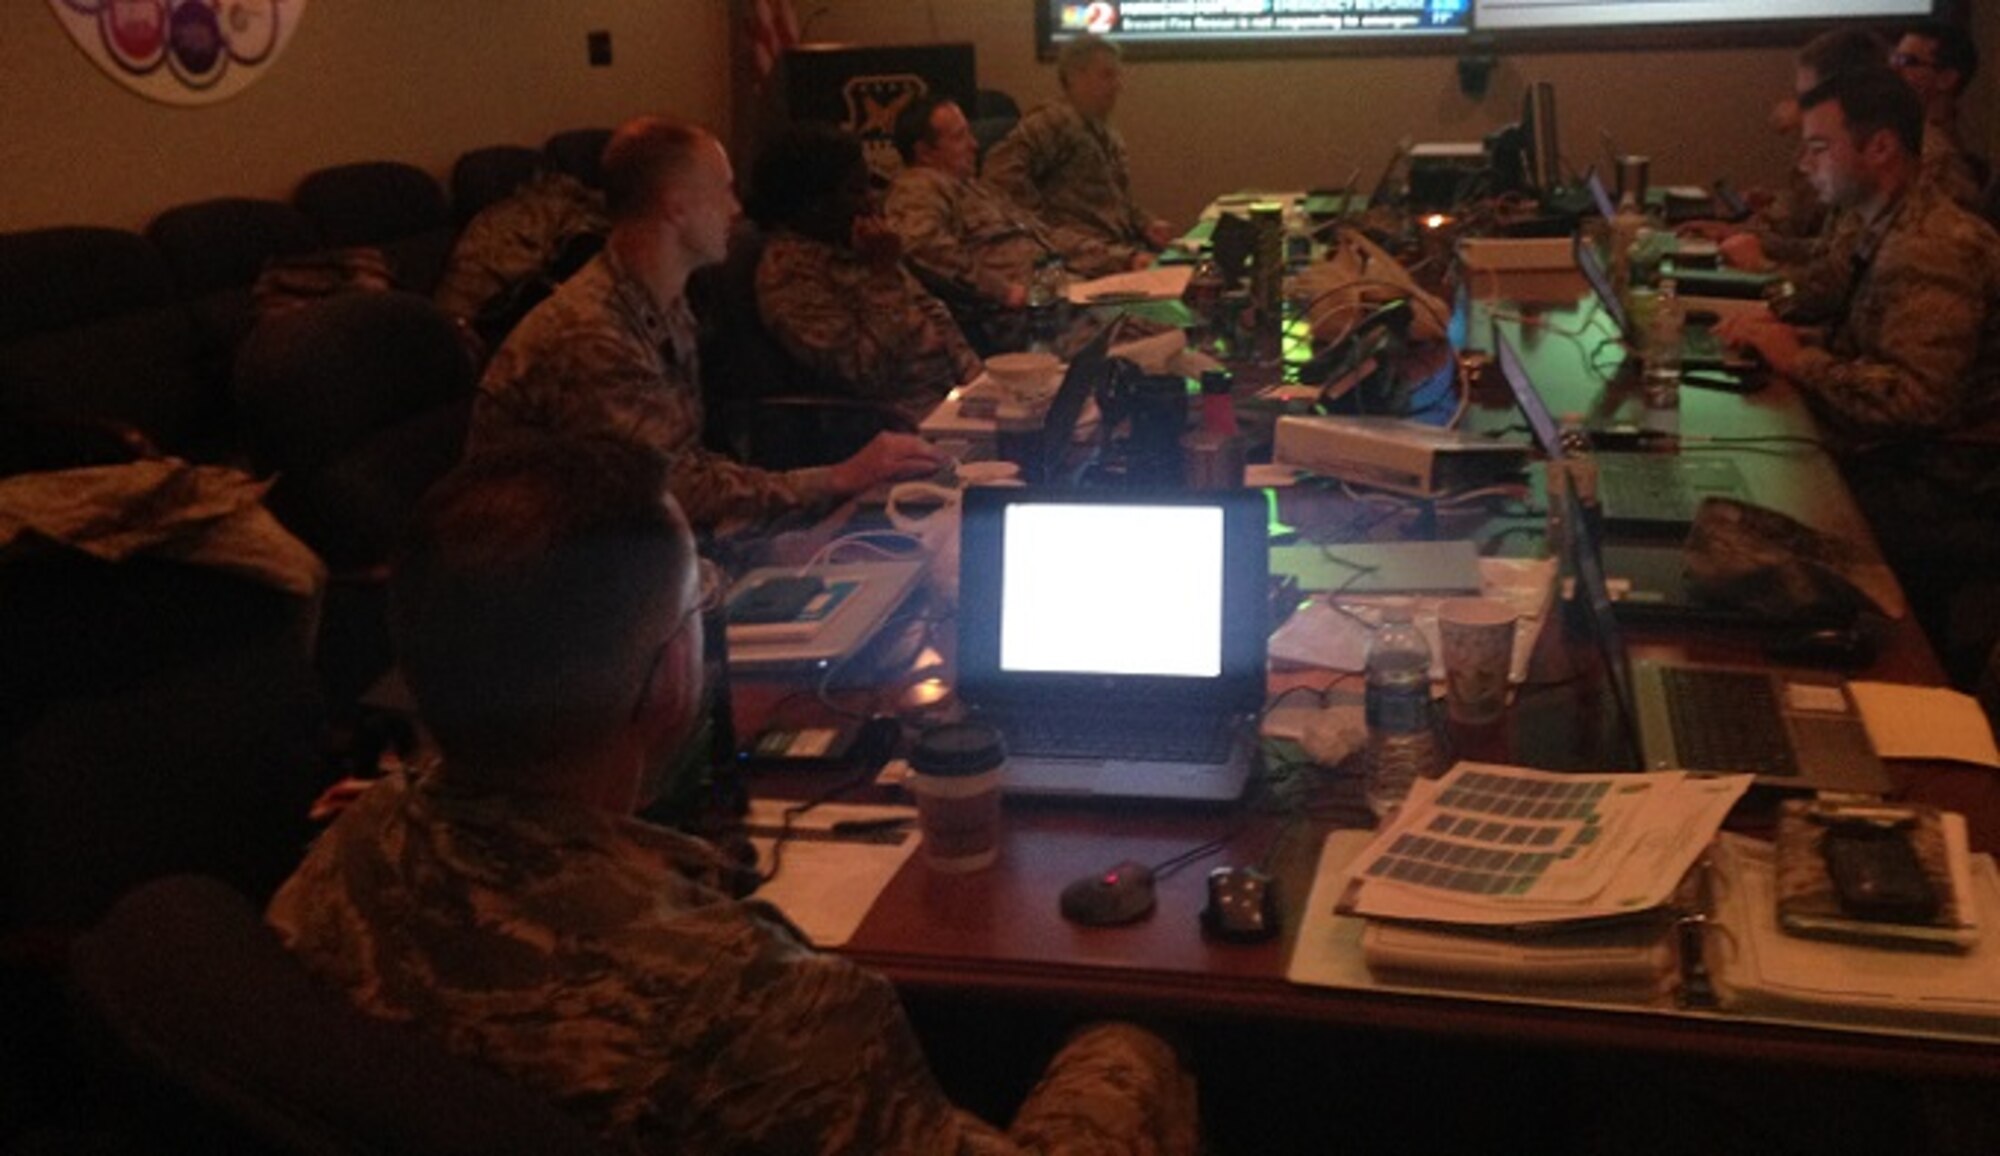 A day prior to the anticipated arrival of Hurricane Matthew, the "Blue Team" set up a 45th Space Wing mission planning cell in Orlando on Oct. 5, 2016. The team remained in contact with wing leadership until the "Silver Team" stood up at Kennedy Space Center Oct. 6, 2016. Two command and control teams and two hurricane recovery teams stood up during Hurricane Matthew to ride out the storm while Patrick Air Force Base and Cape Canaveral Air Force Station were closed. Together, the wing teams ran 24-hour operations and monitored the storm track from the day prior to the arrival of Hurricane Matthew through recovery operations. The 45th SW returned to normal operations within three days following the storm.  (Courtesy photo)